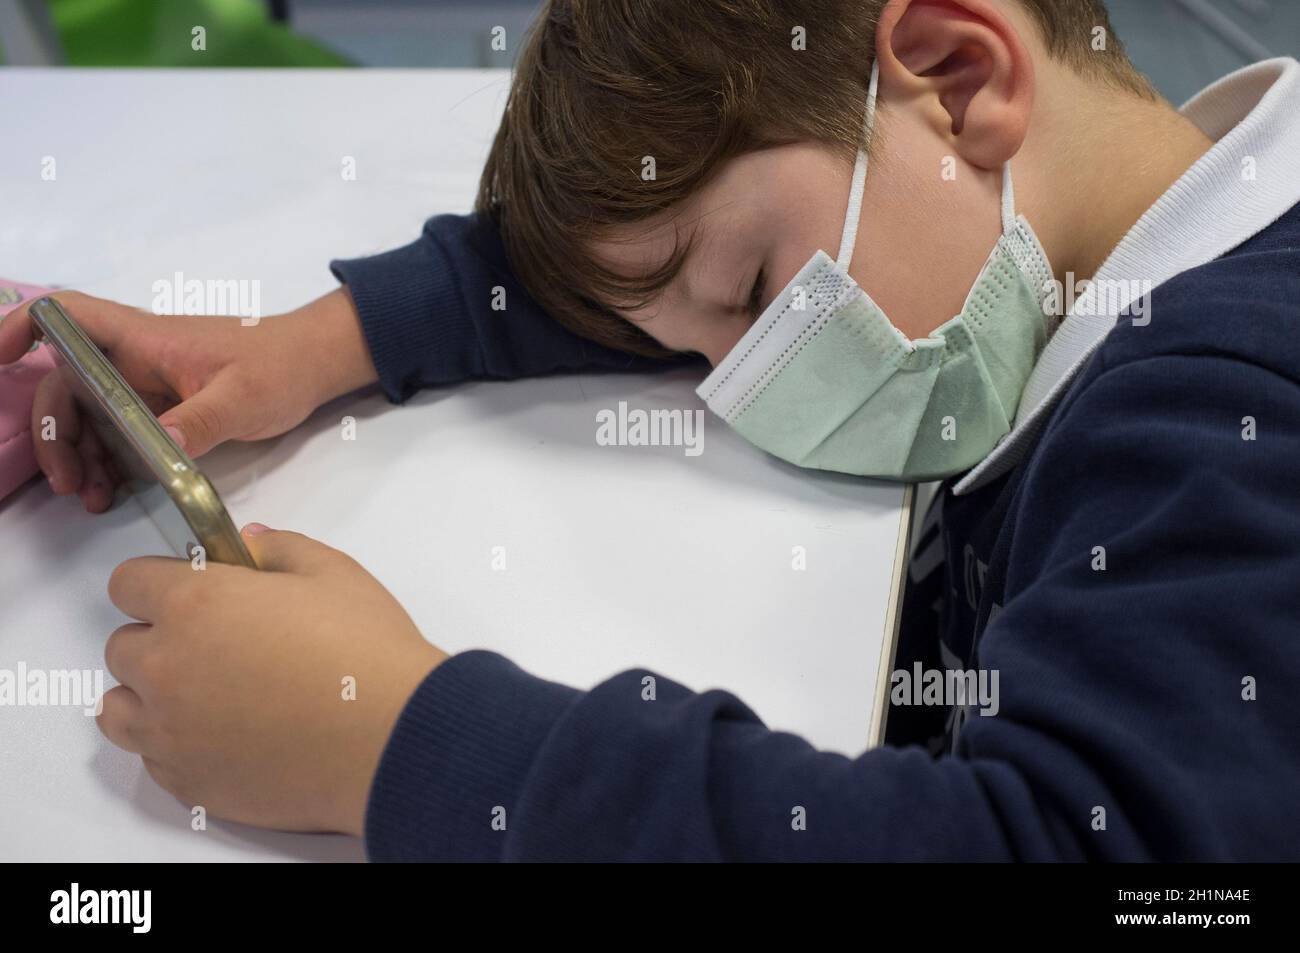 Tired 5 years old sleeping while he holds smartphone. Too much screen time concept Stock Photo